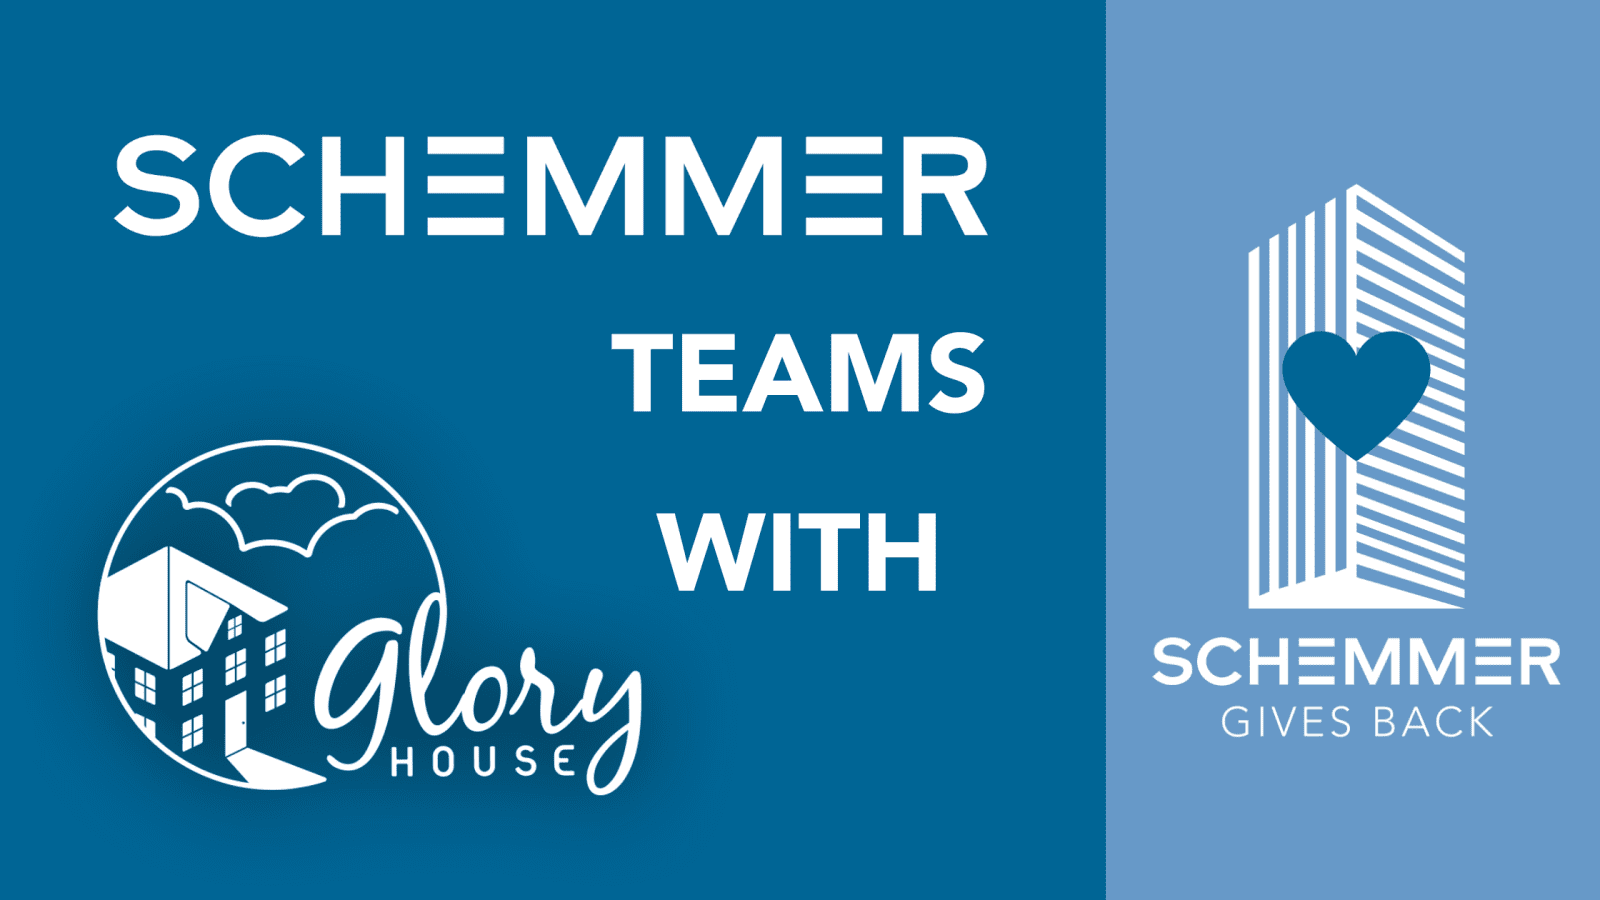 Schemmer Gives Back & Glory House: A Story of Hope and Community